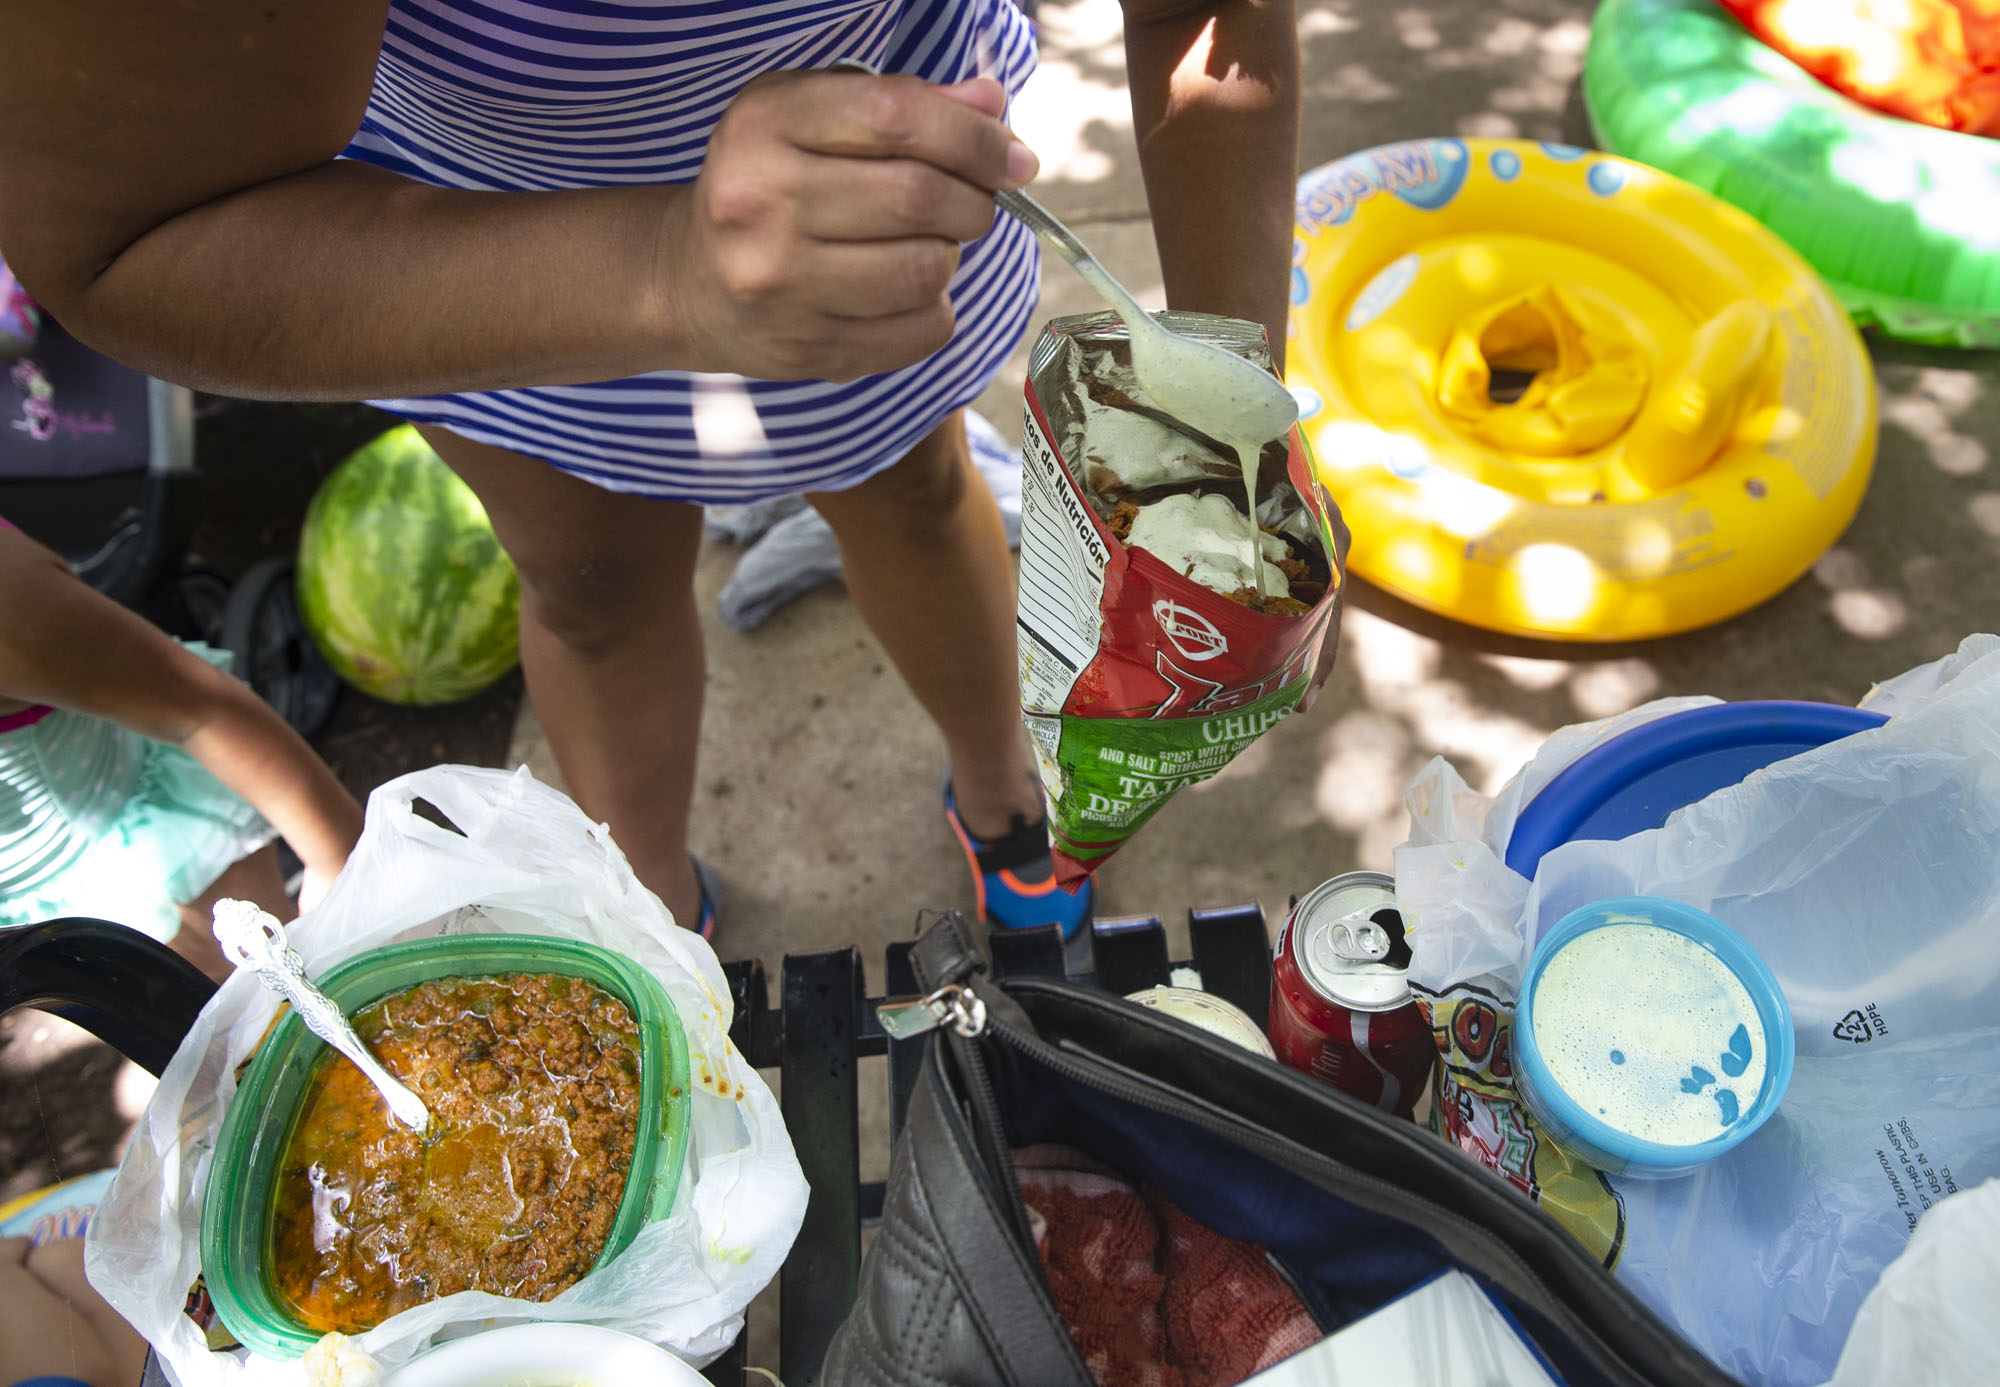  Rosales prepares an  antojito,  a type of snack she said is popular in Honduras. Rosales and her family enjoy going to Sewell Park and bring along a day’s worth of food to eat while they enjoy the river.  